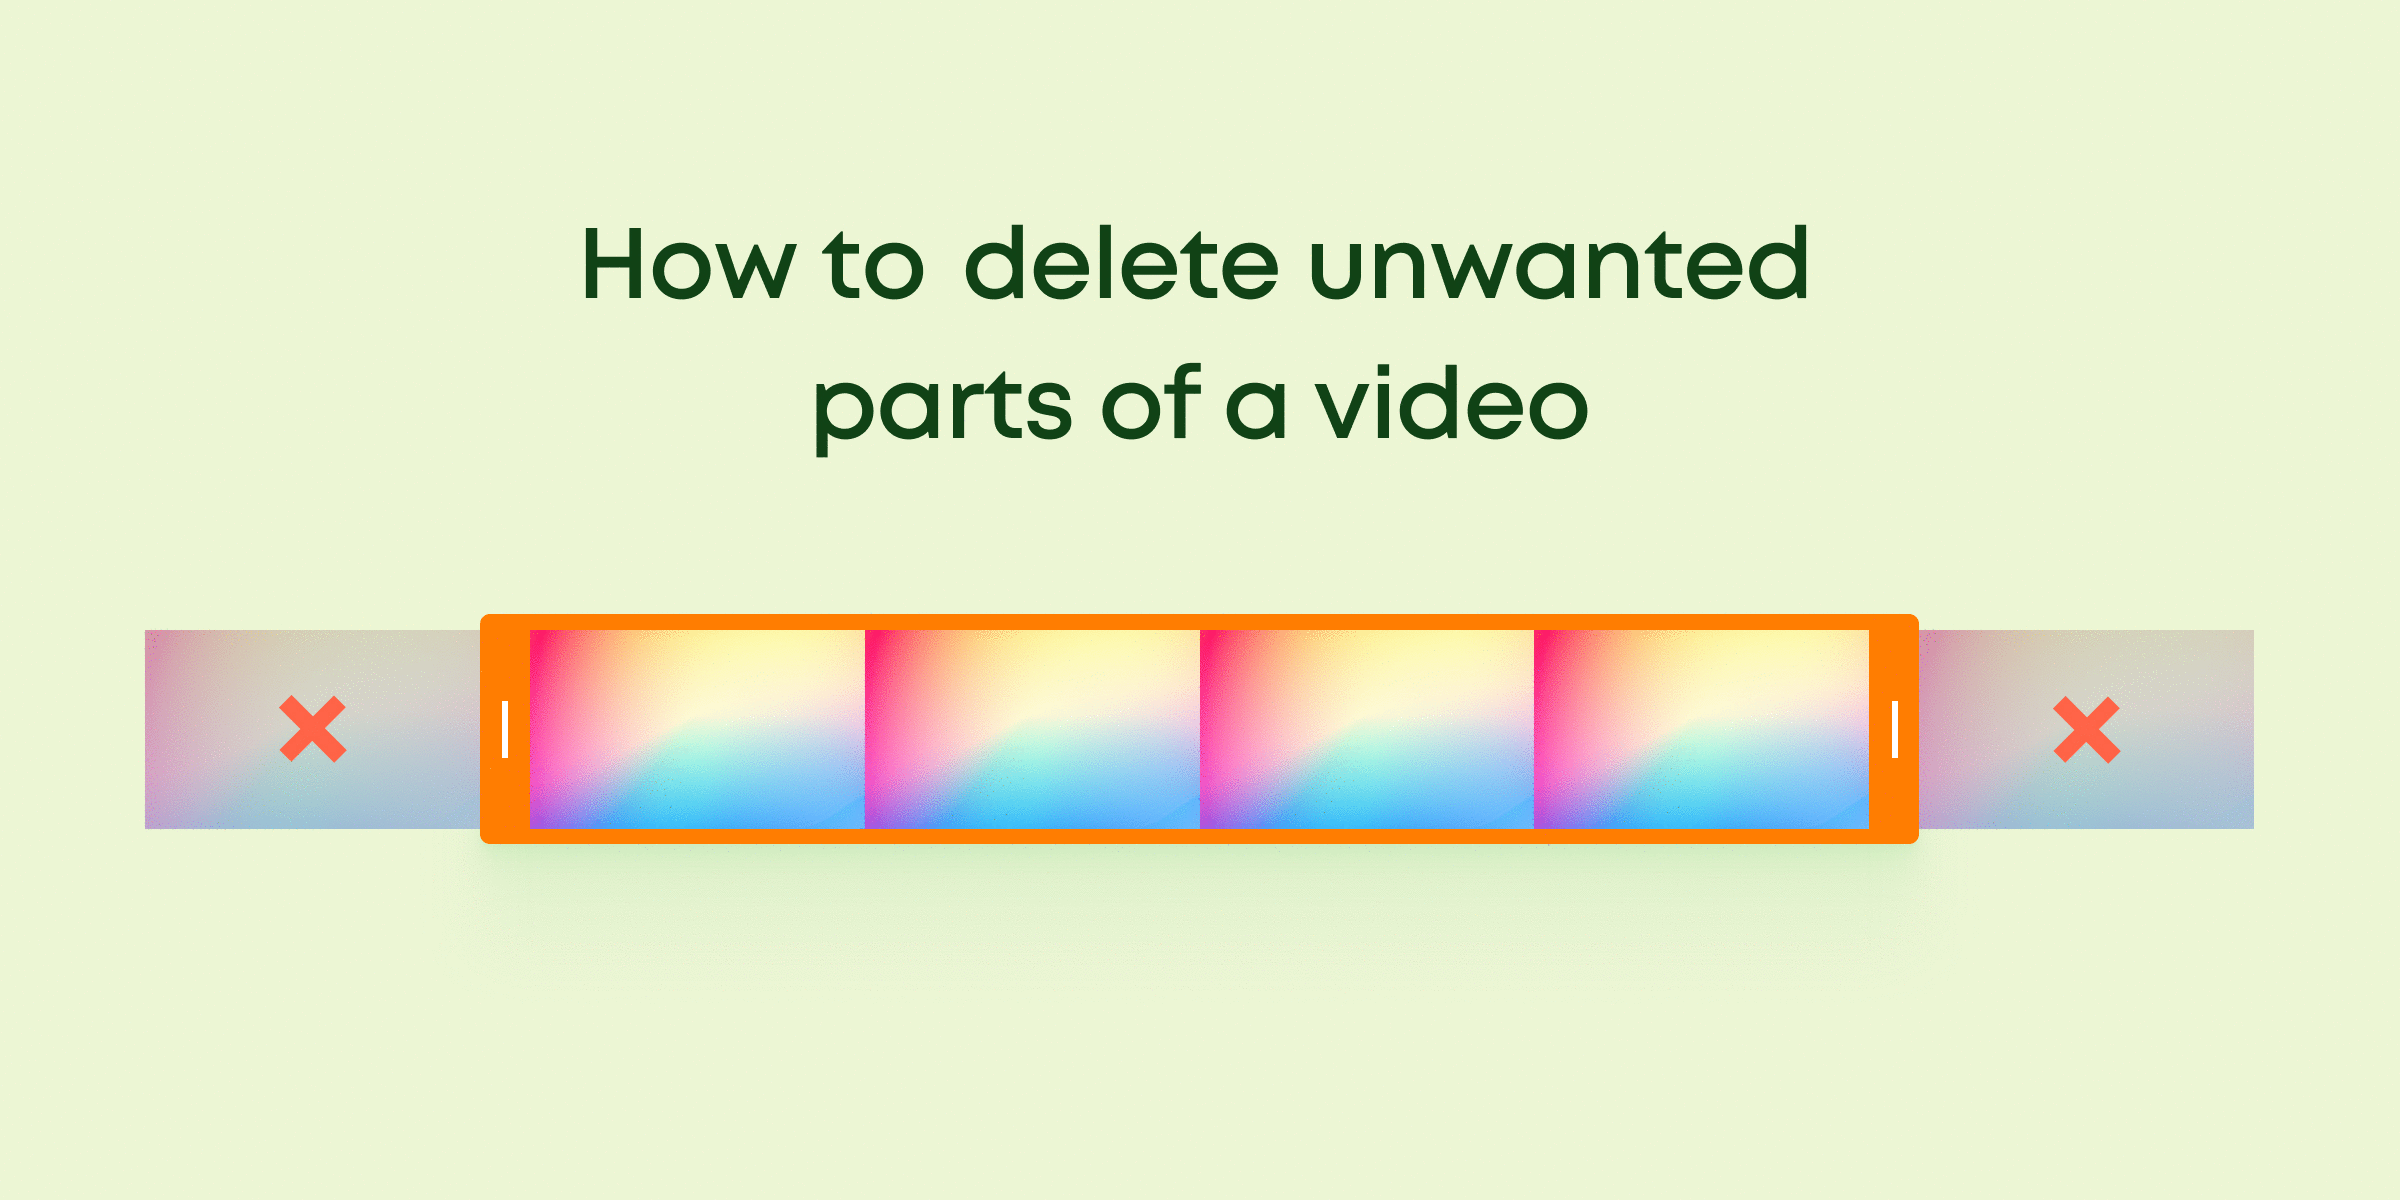 How to Delete Unwanted Parts of a Video in Windows 10